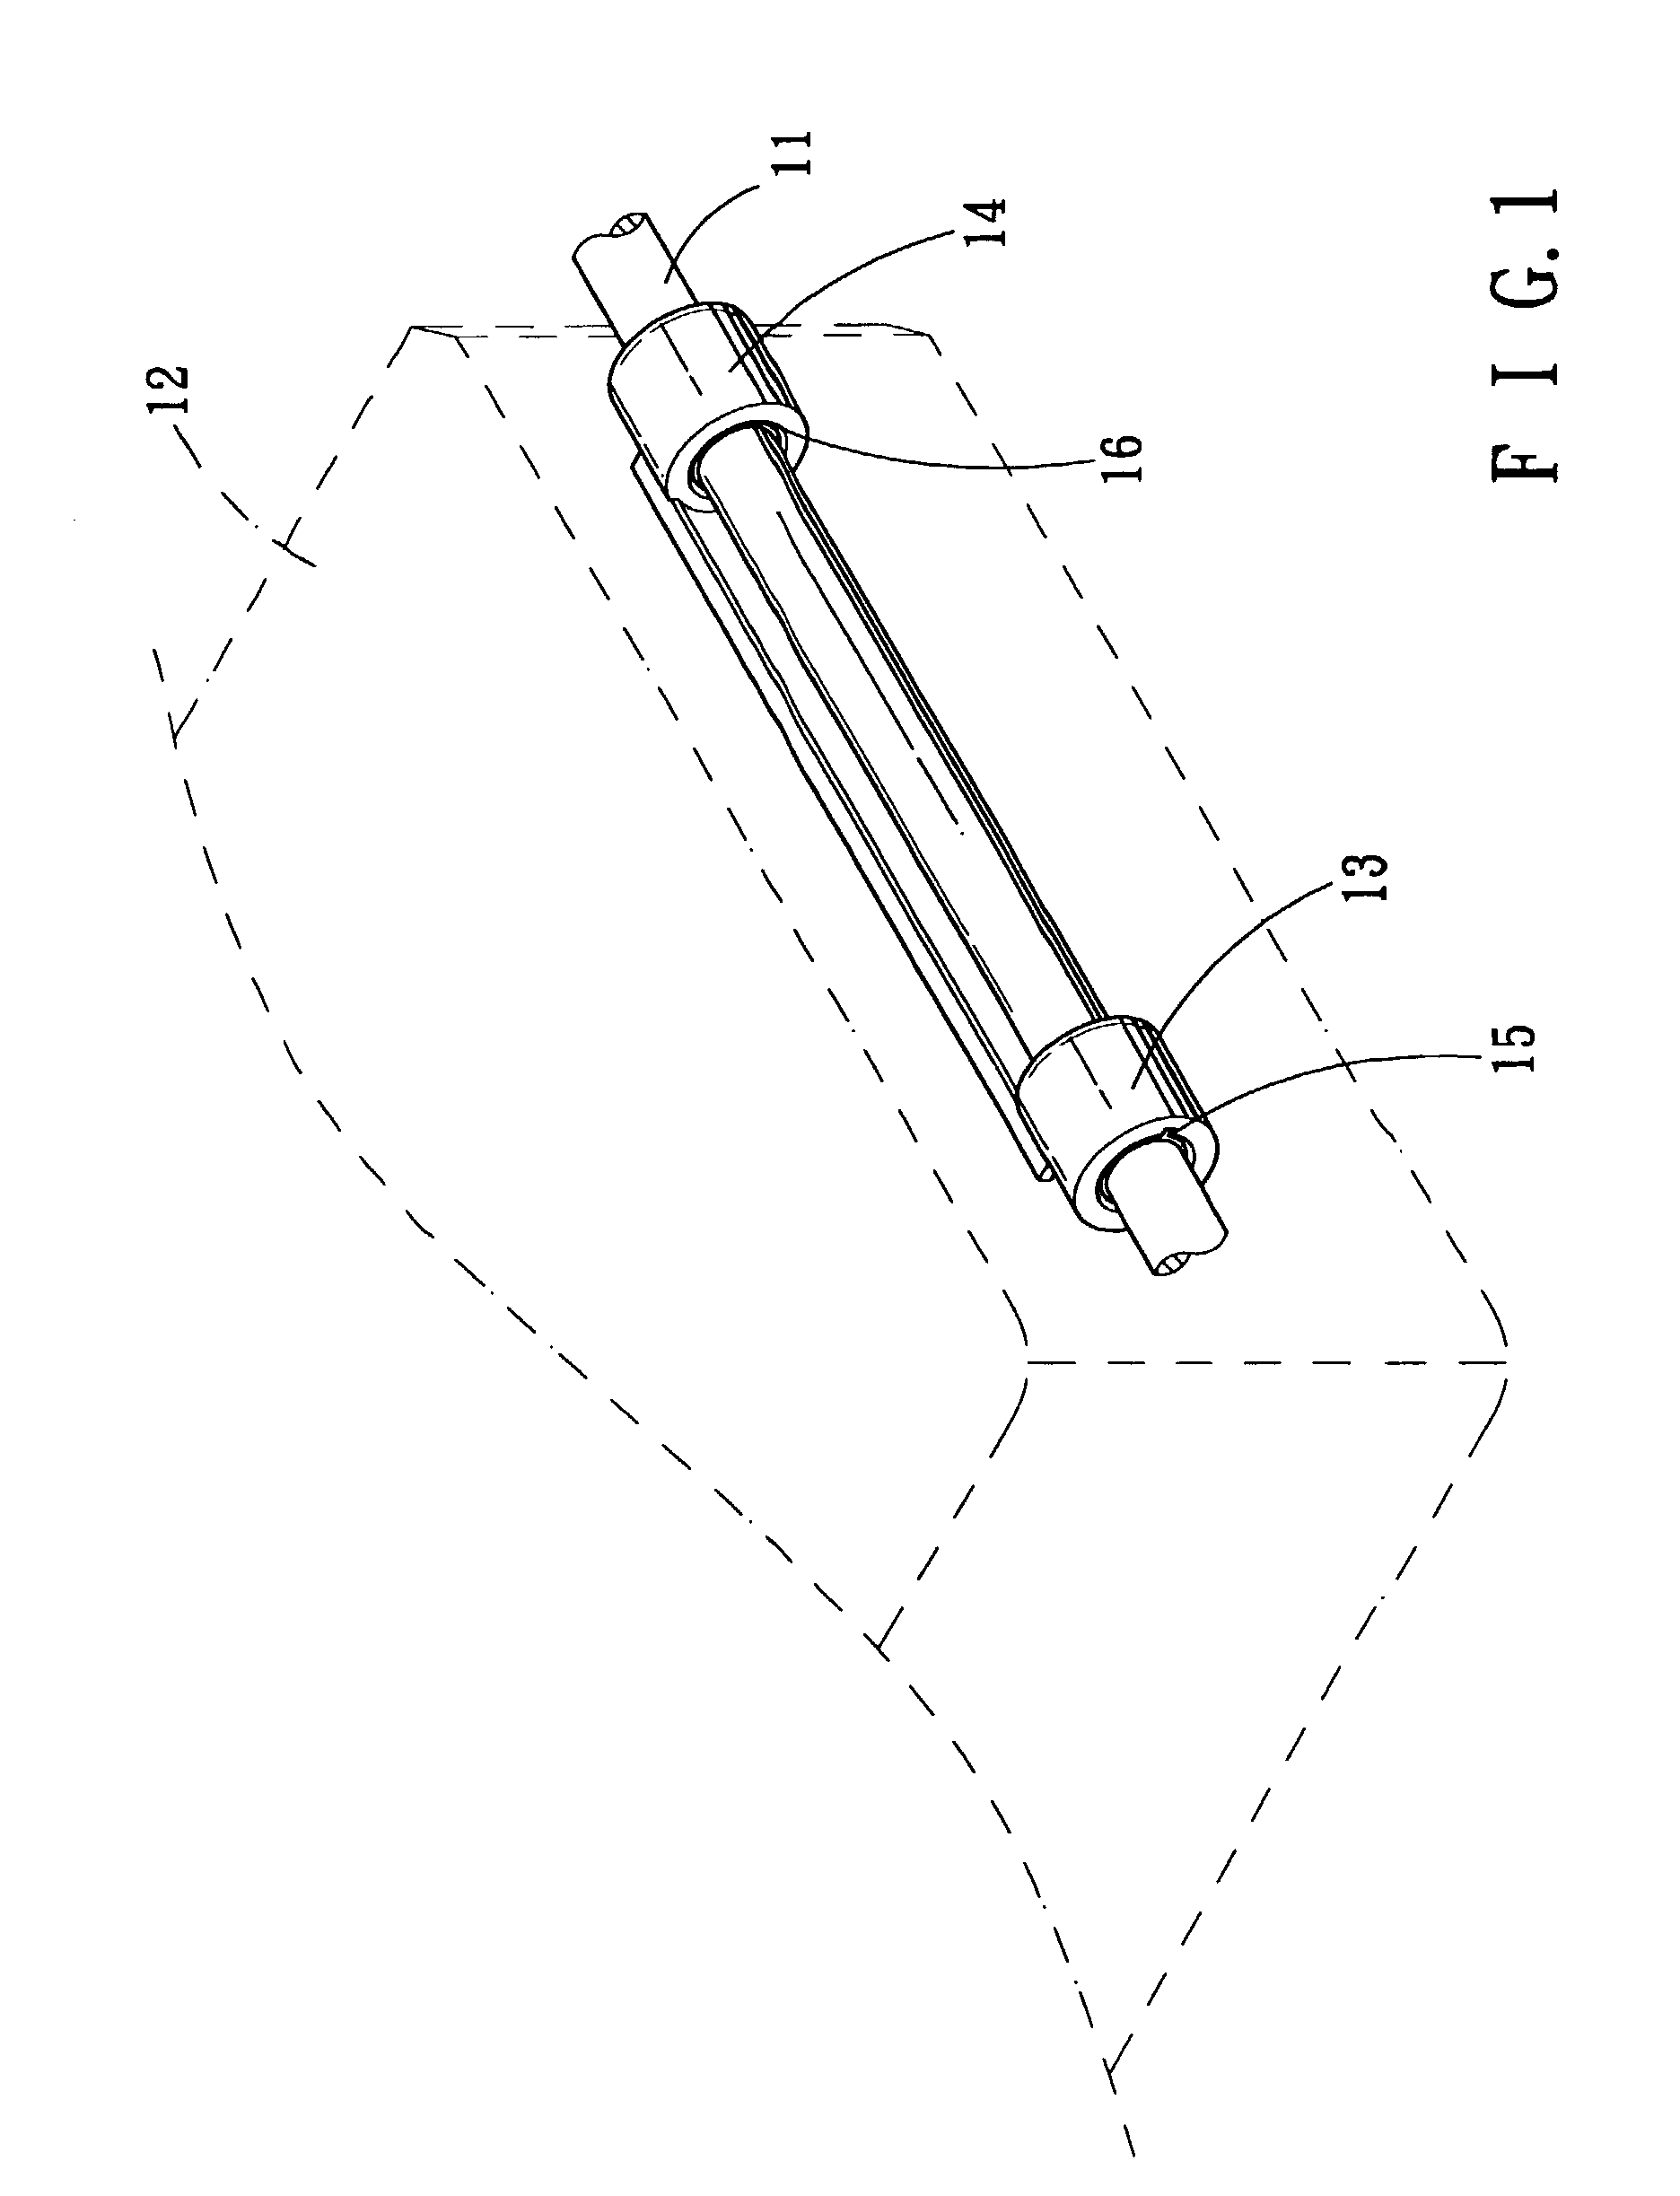 Bushing assembly having a self-alignment function